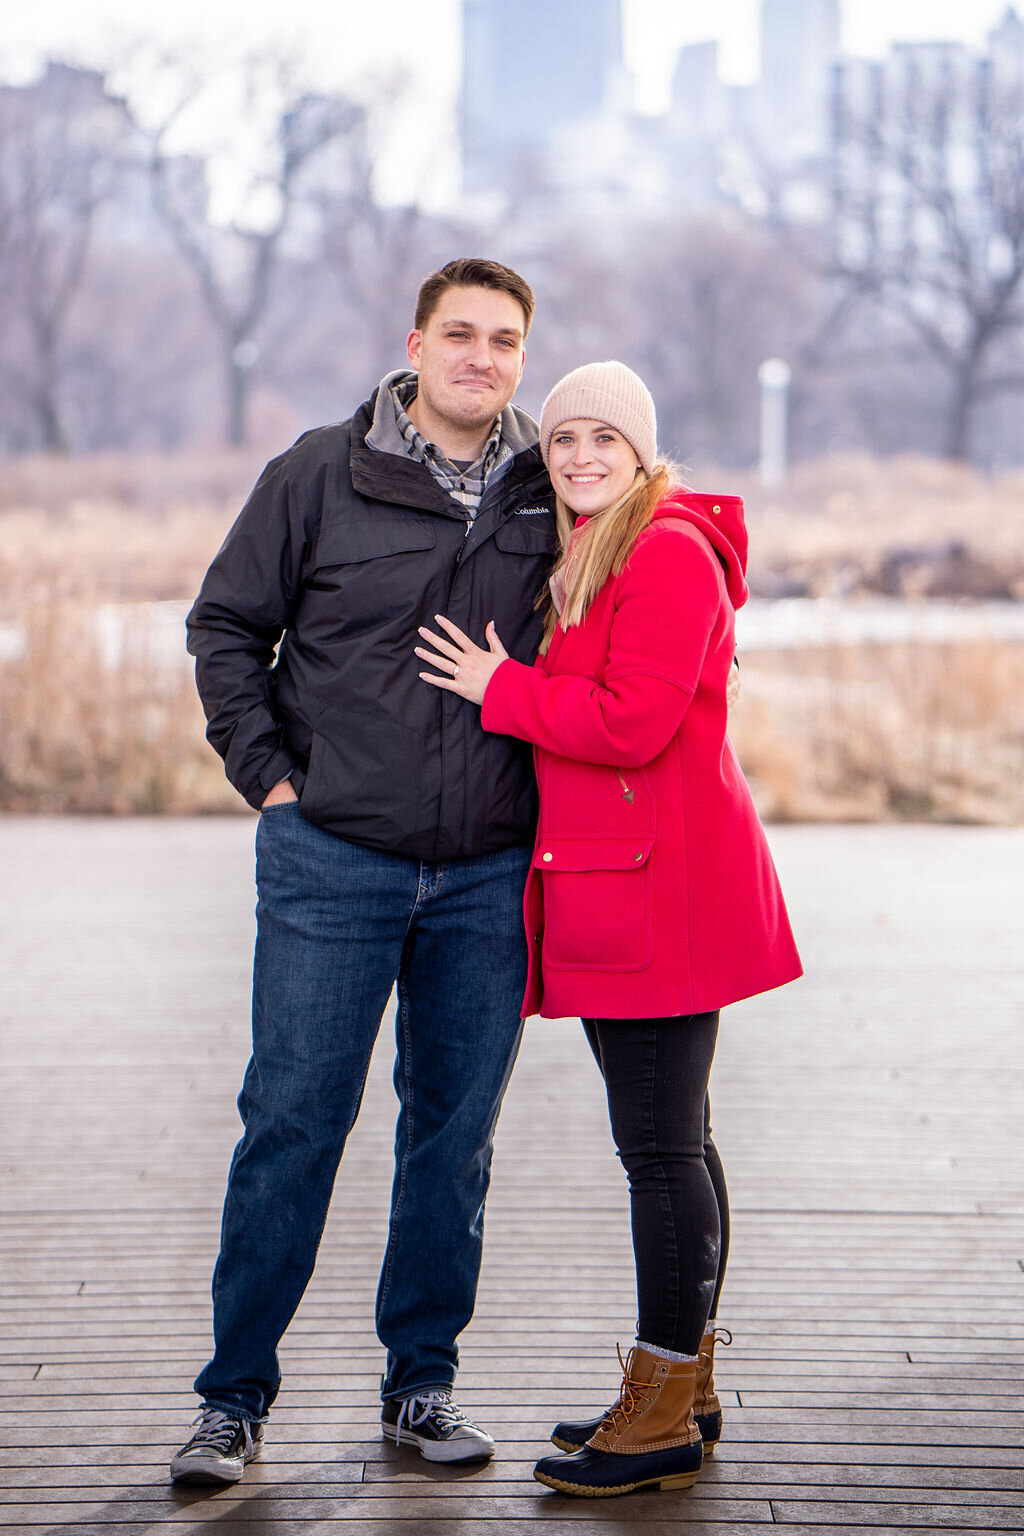 chicago-lincoln-park-proposal-photography (15).jpg